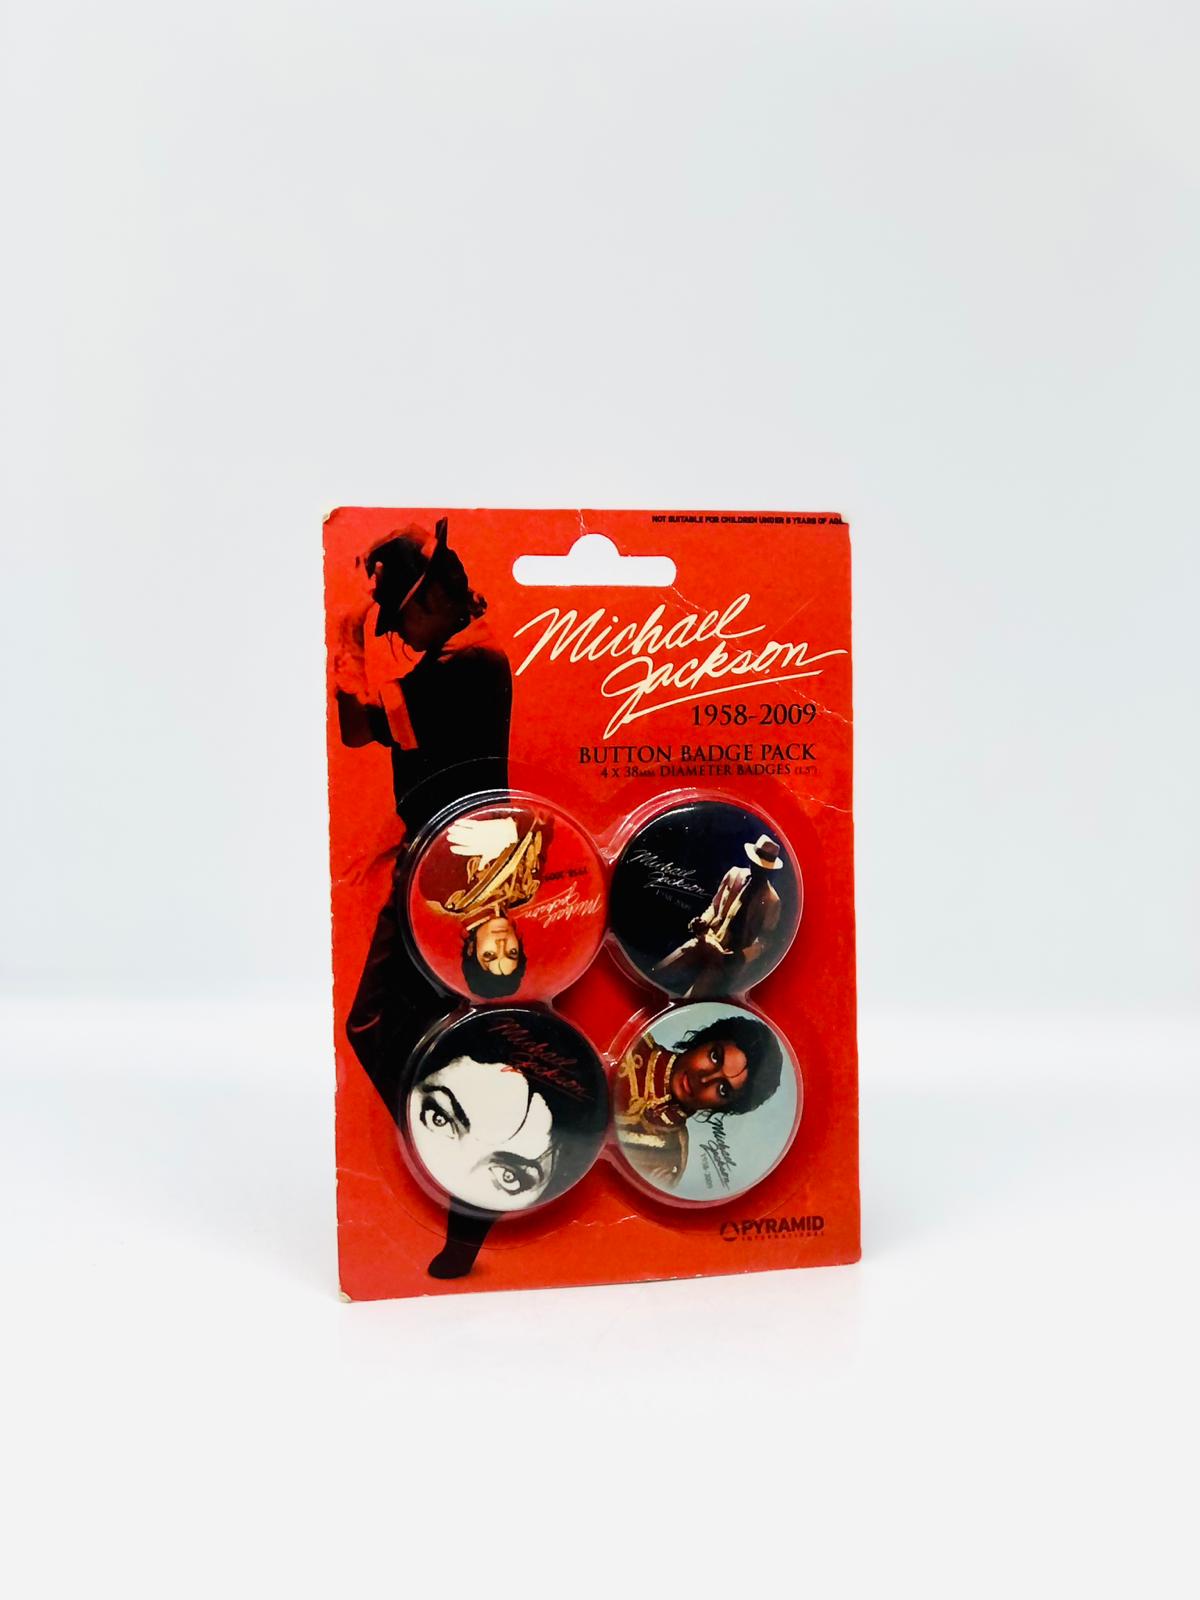 Rare Michael Jackson 1958-2009 Button Badge Pack Collectors MJ - Image 4 of 5